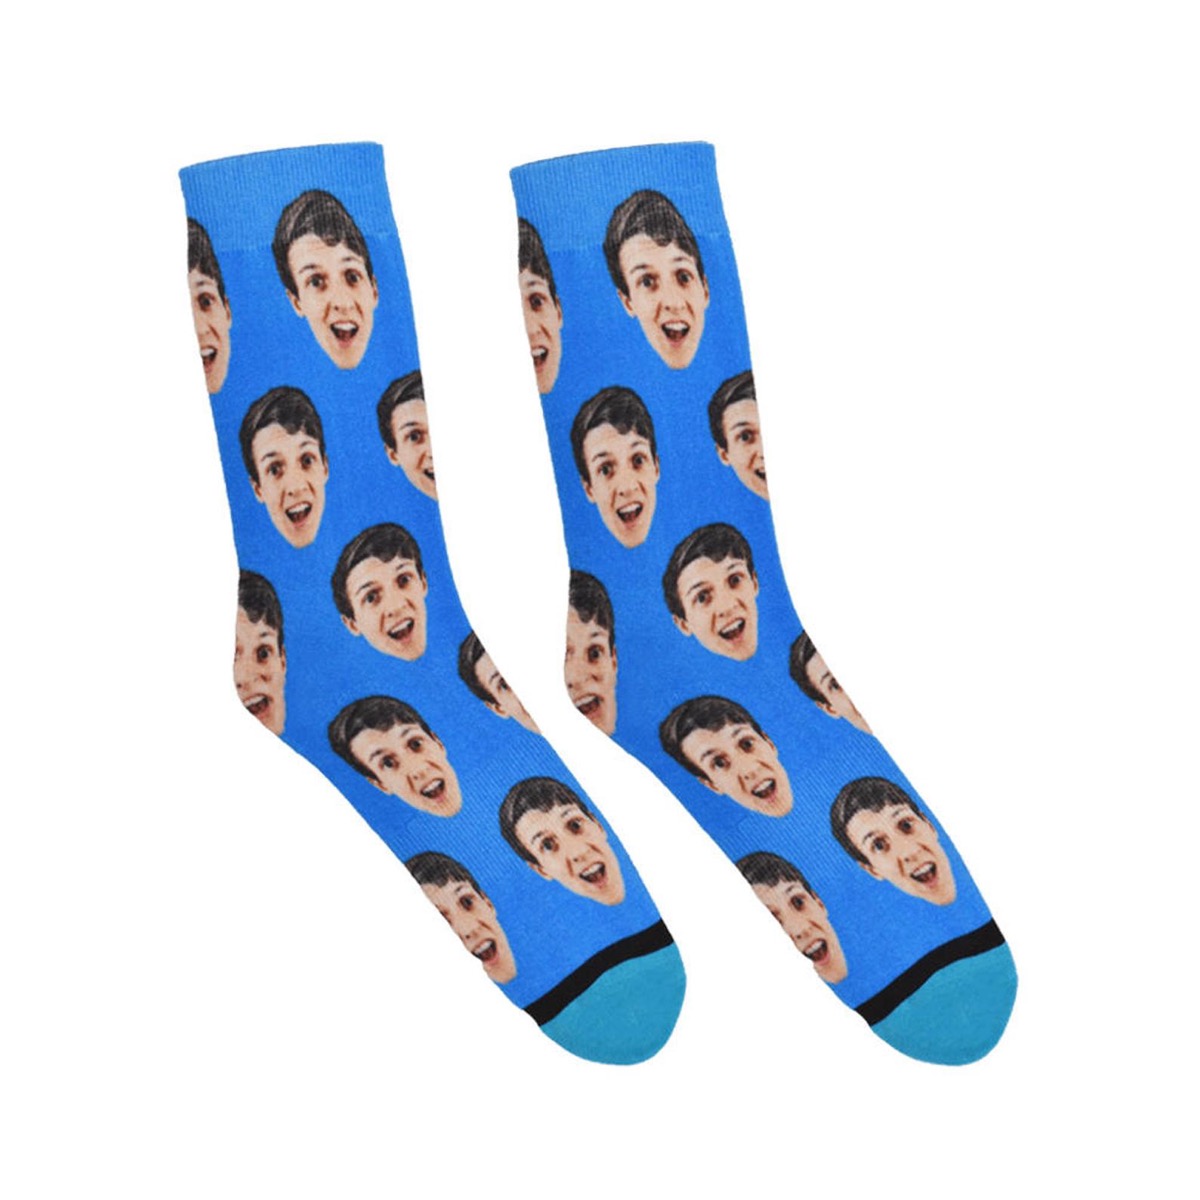 socks with man's face on them